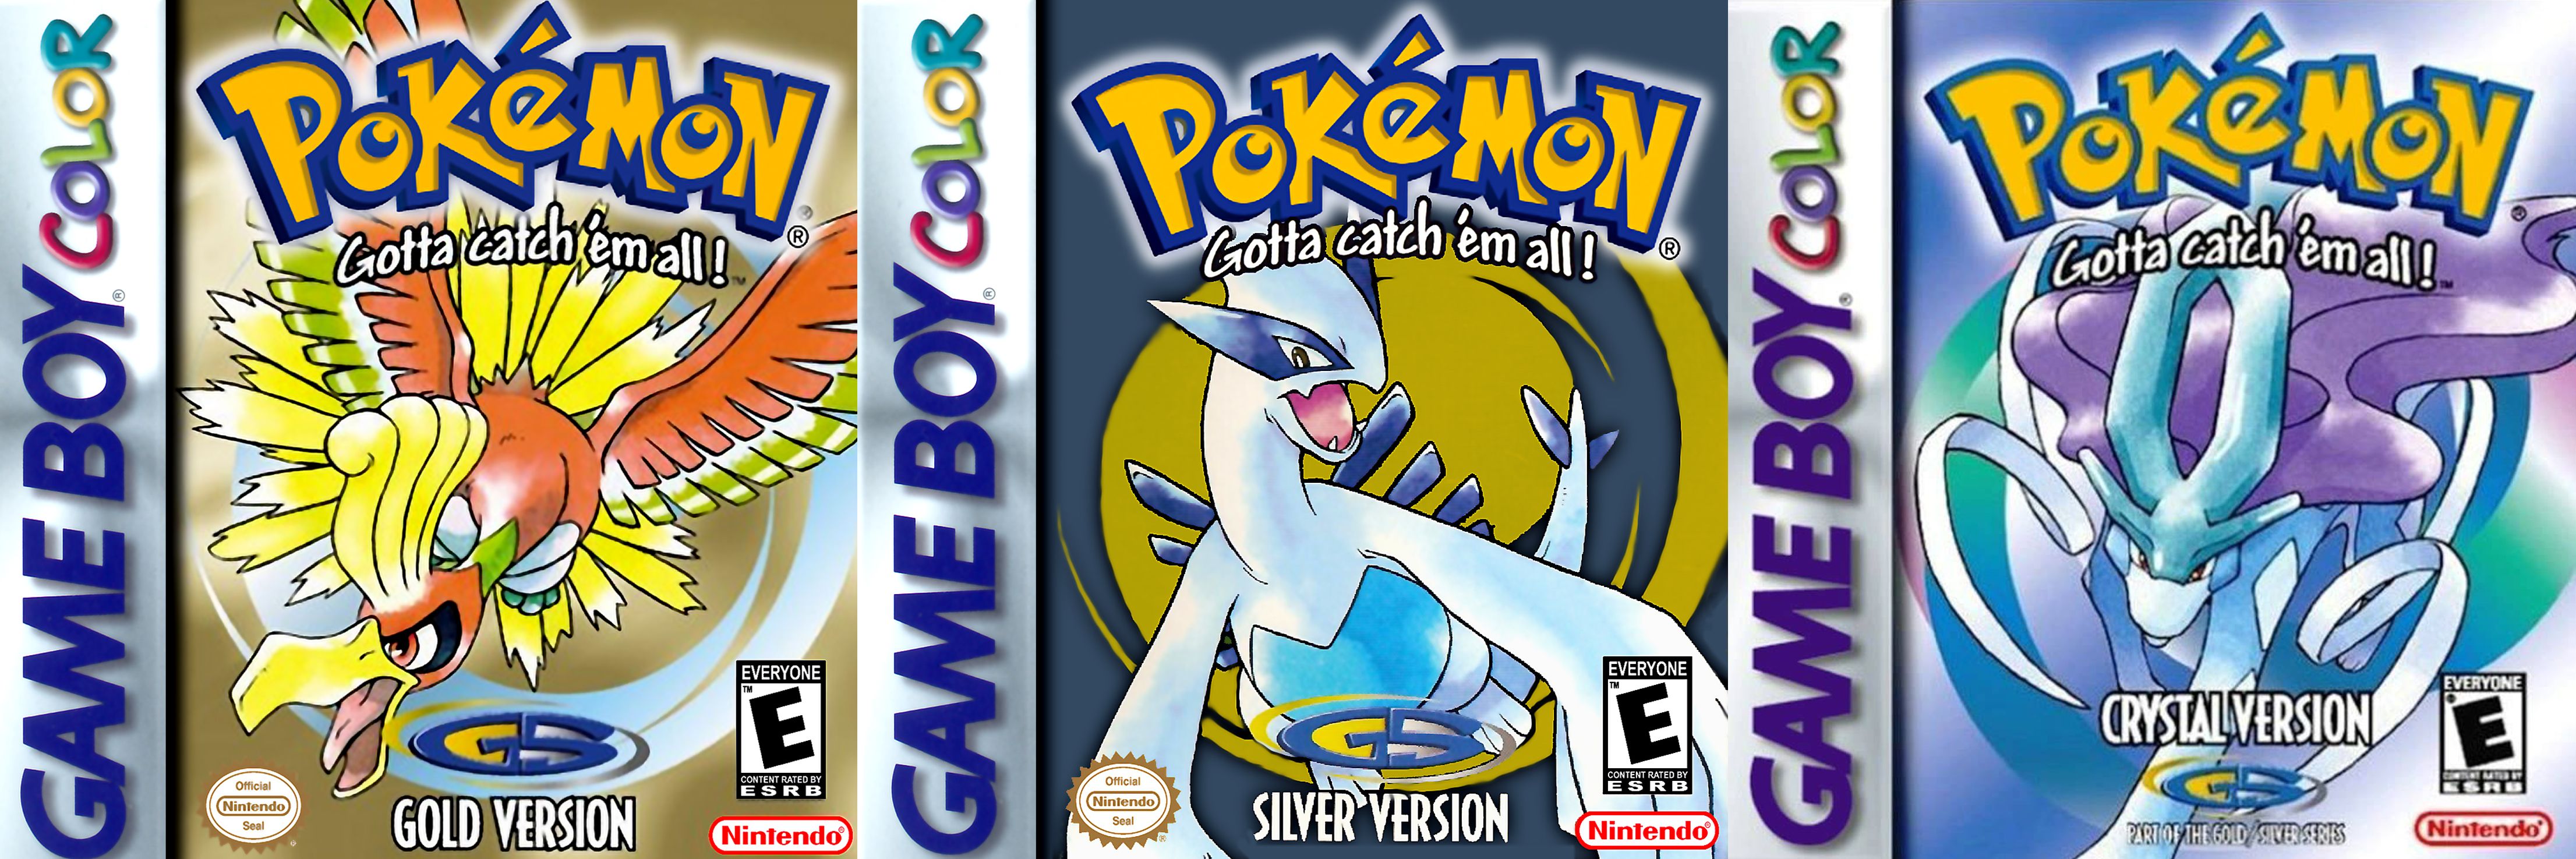 Pokemon Gold, Silver, & Crystal, 3DS, Exclusives, Pokemon